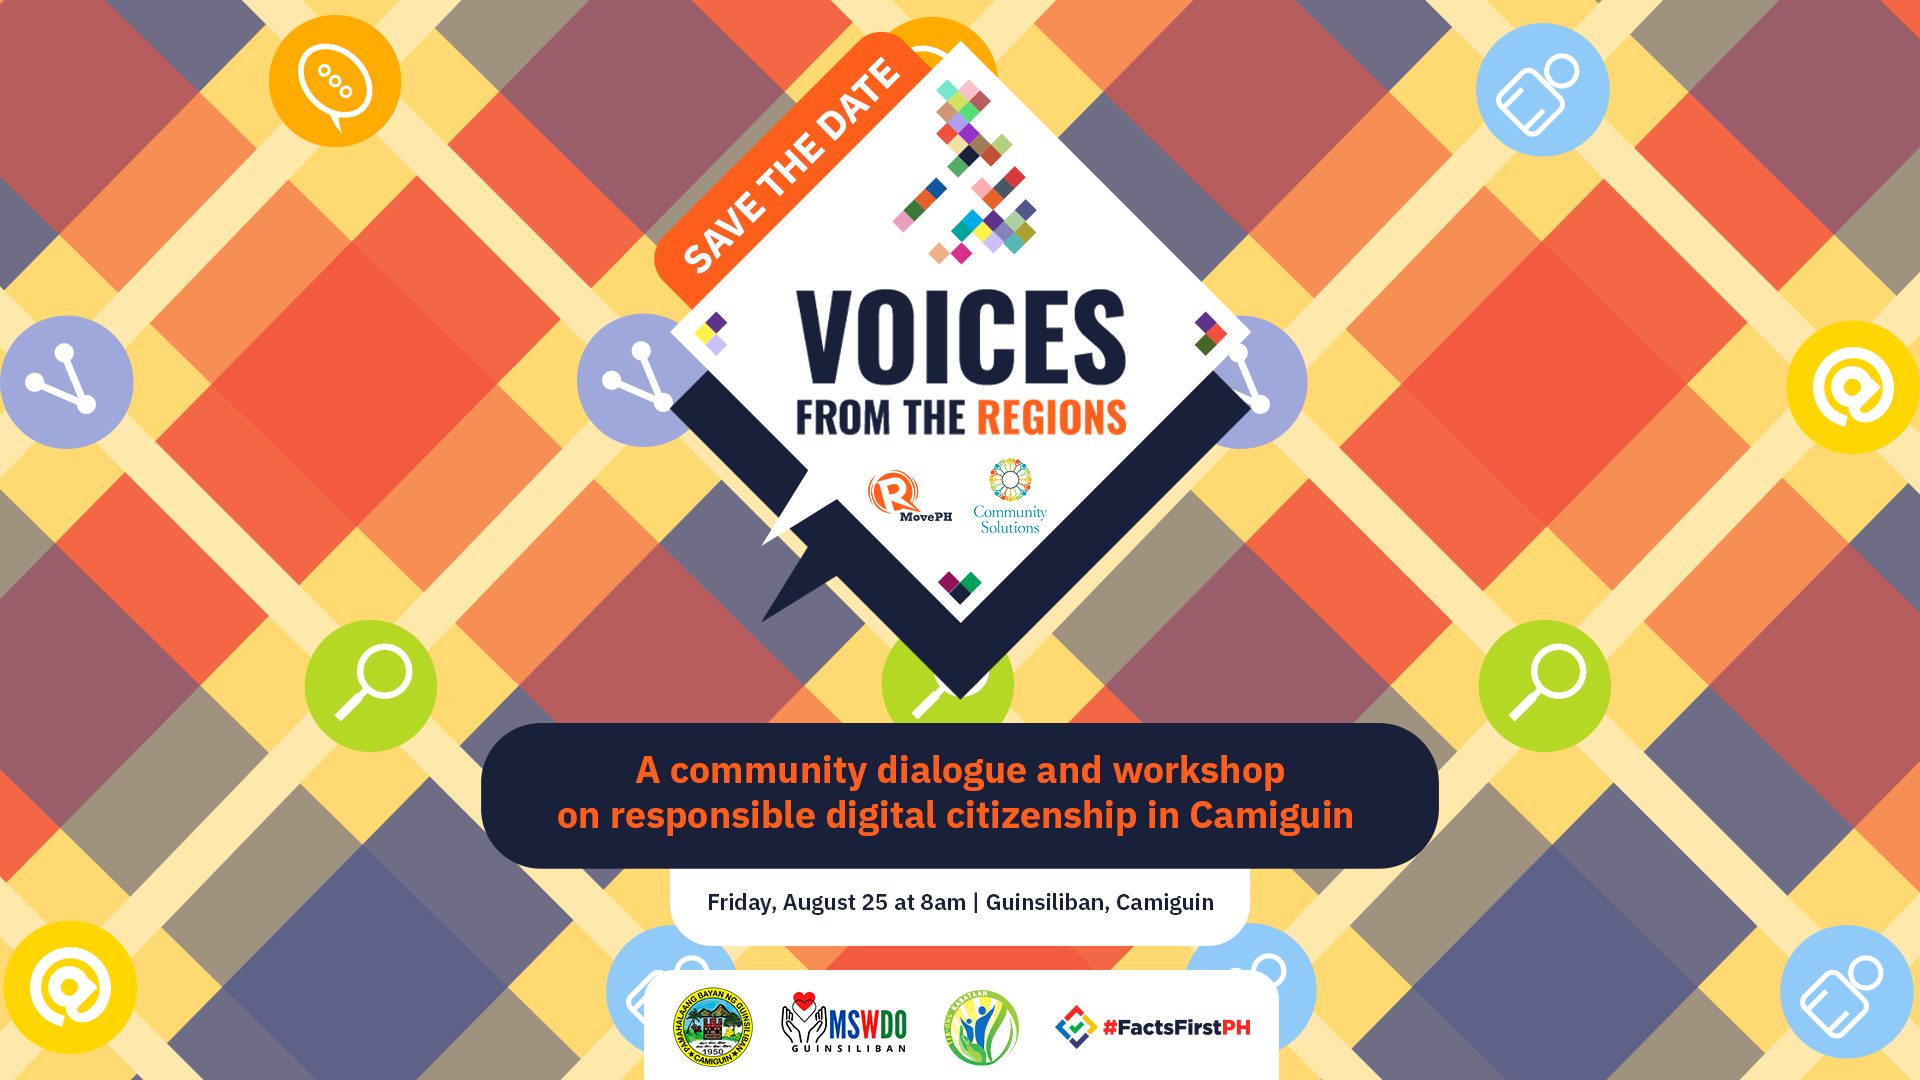 MovePH holds #VoicesFromTheRegions dialogue, workshop in Camiguin